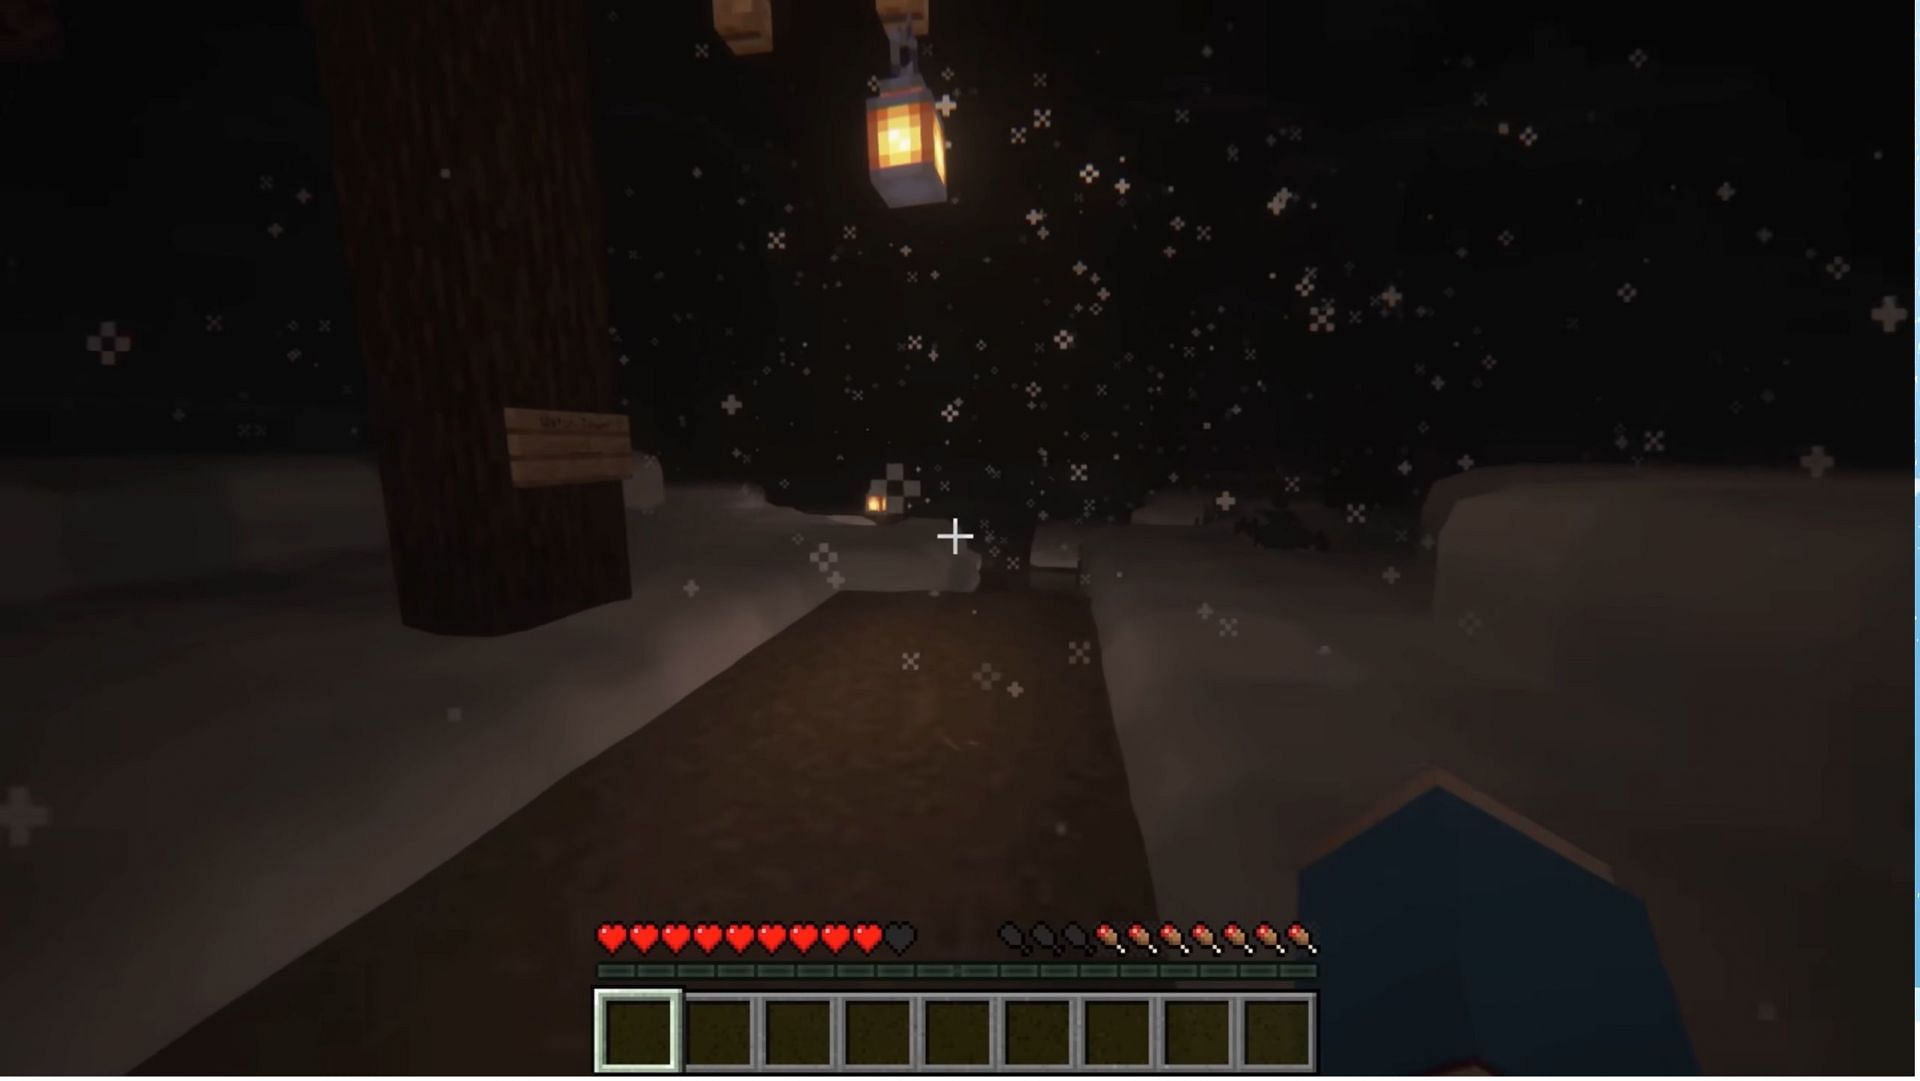 The ambiance of the mod adds to the horror (Image via YouTube/Swayle)